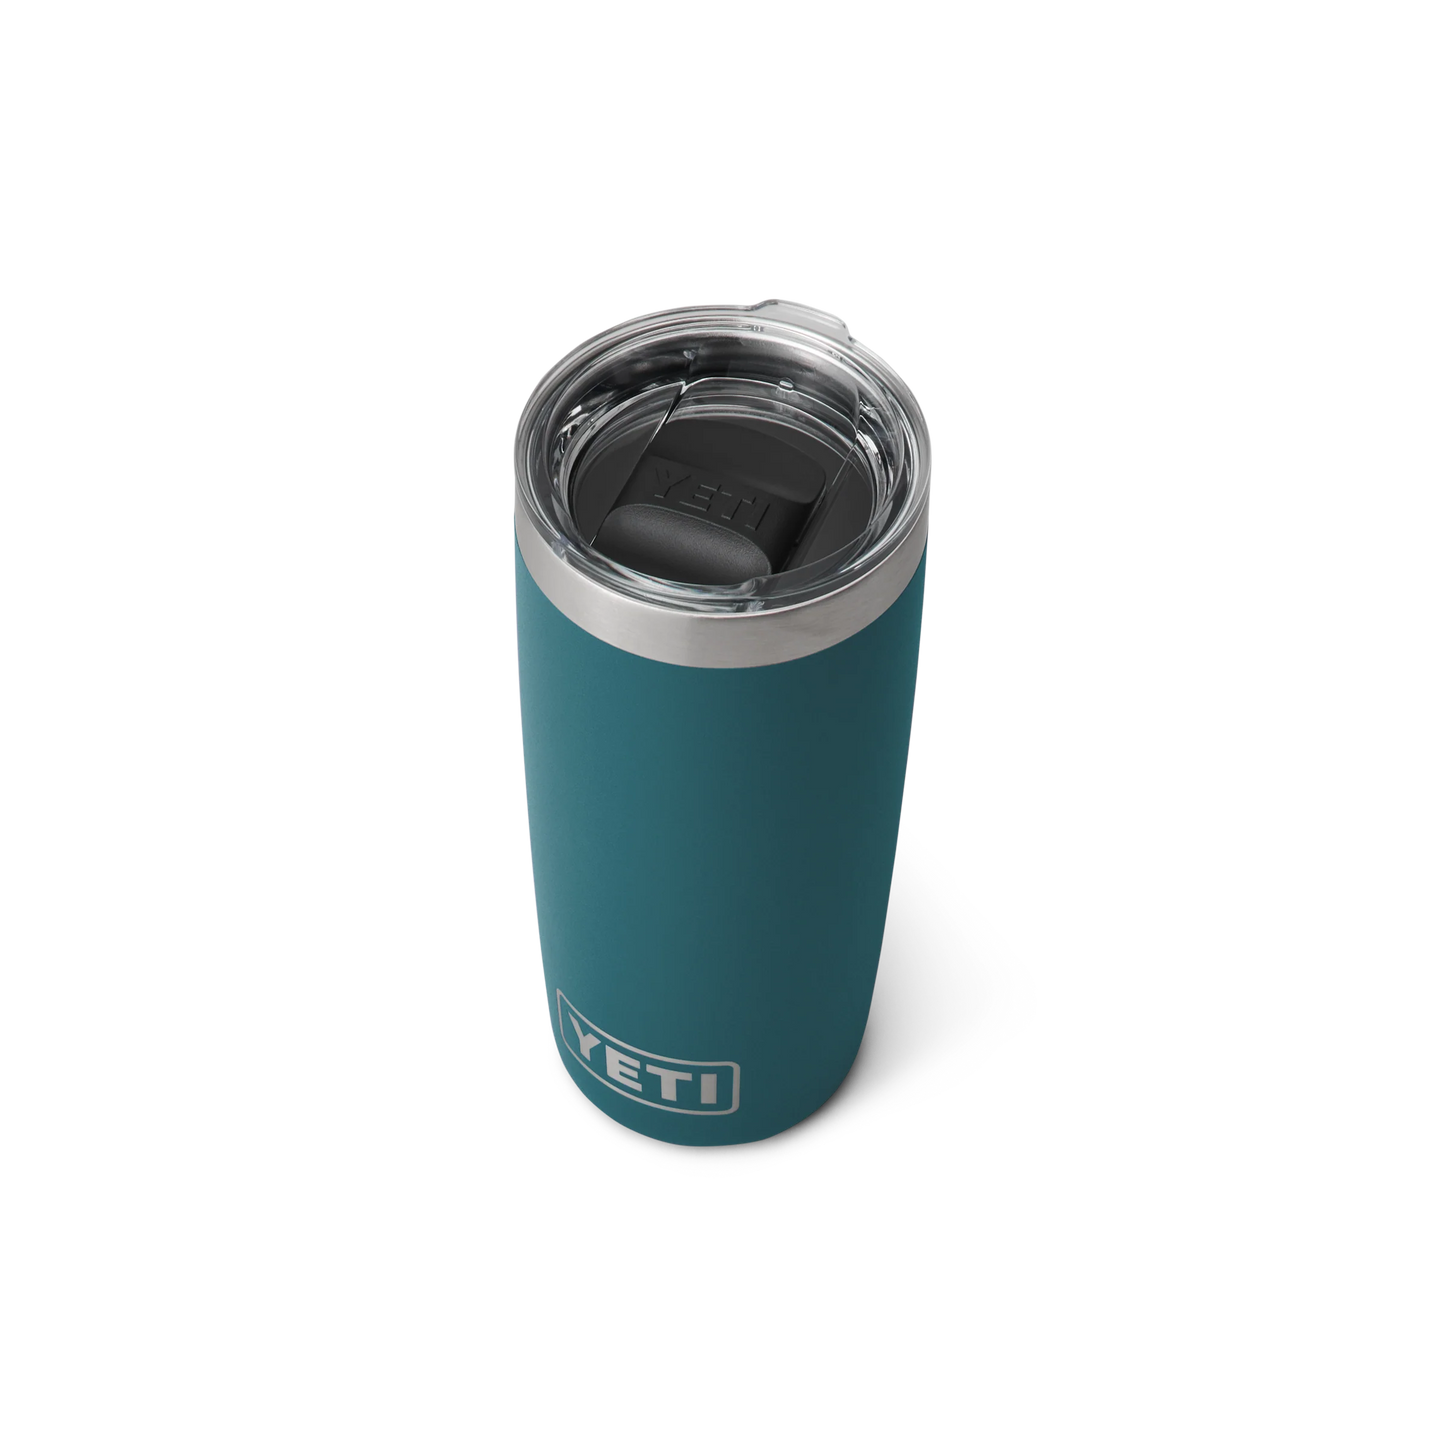 Yeti Tumbler 10oz (295ml) with Magslider Lid-Coolers & Drinkware-Yeti-Agave Teal-Fishing Station